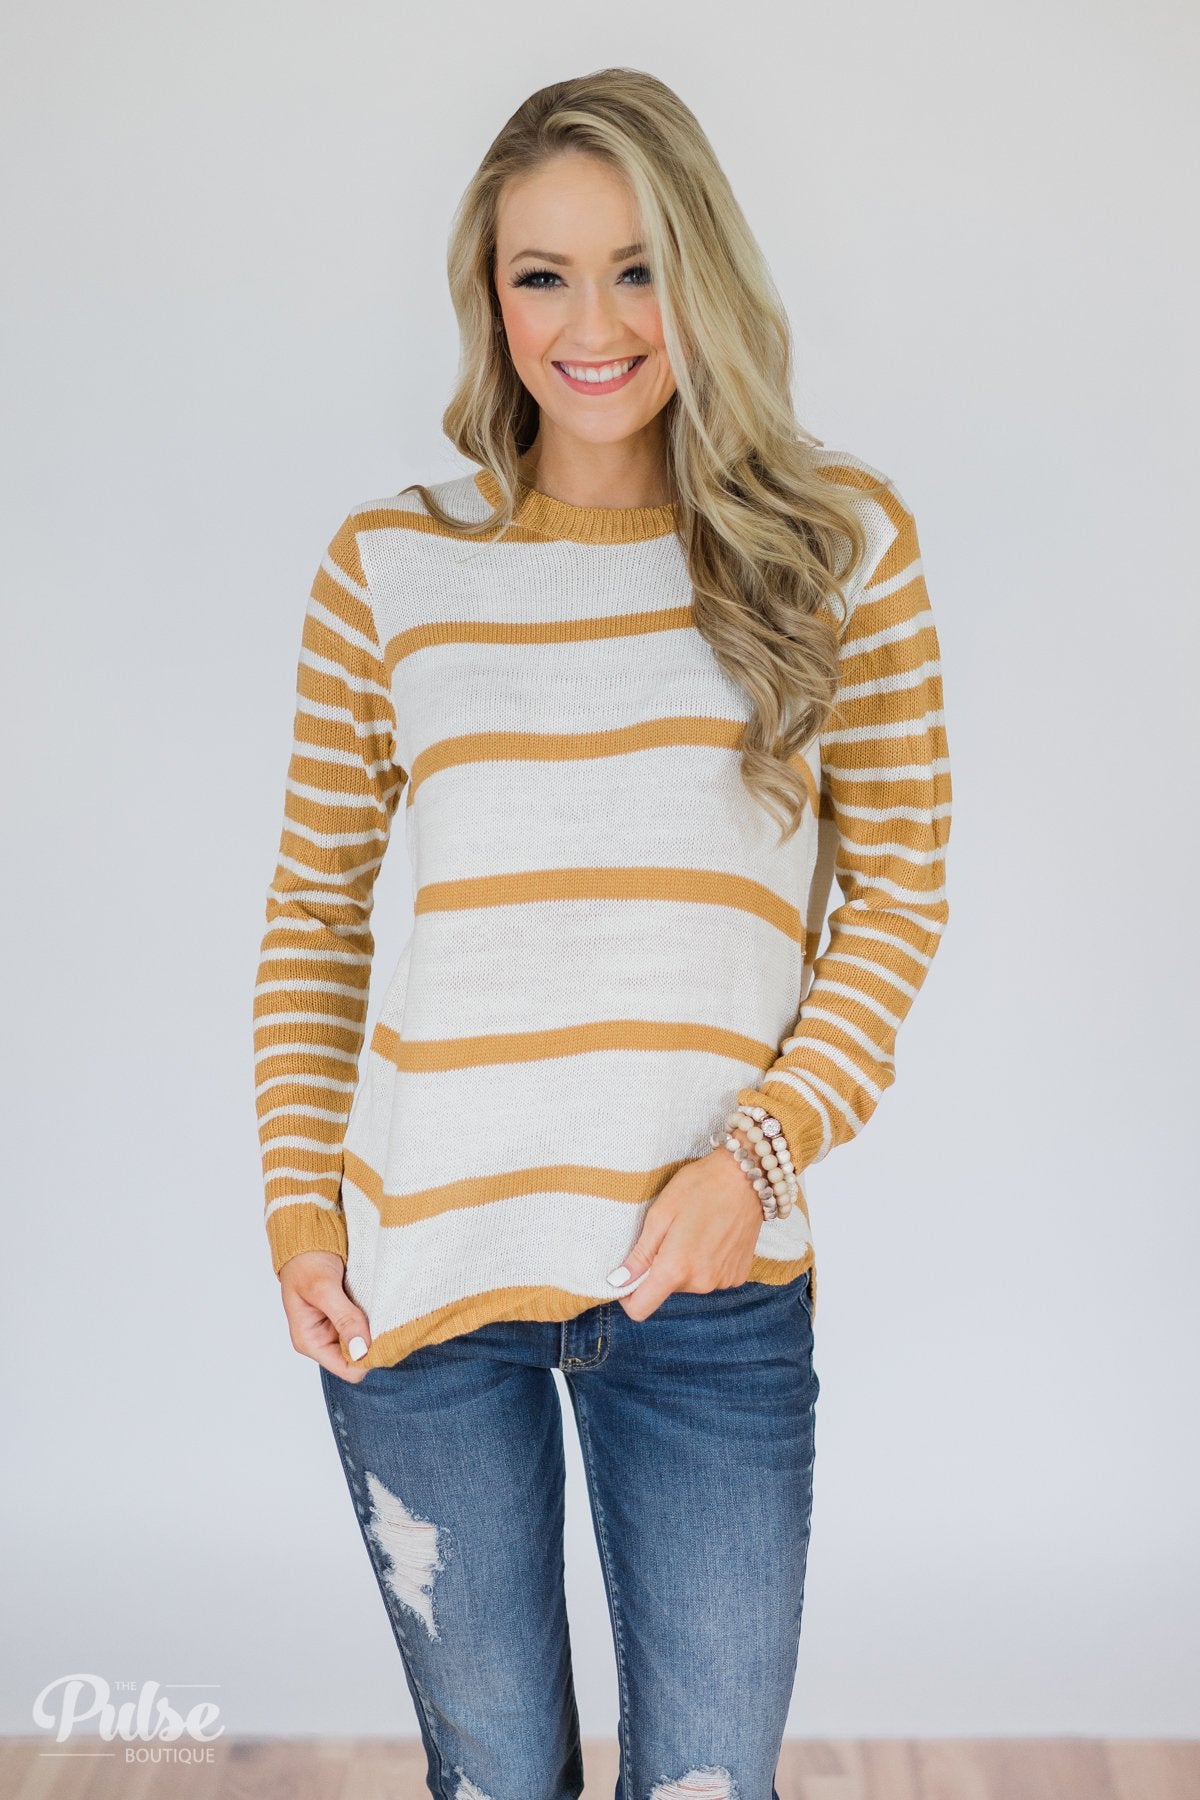 Good Things Coming Striped Knit Sweater- Golden Yellow